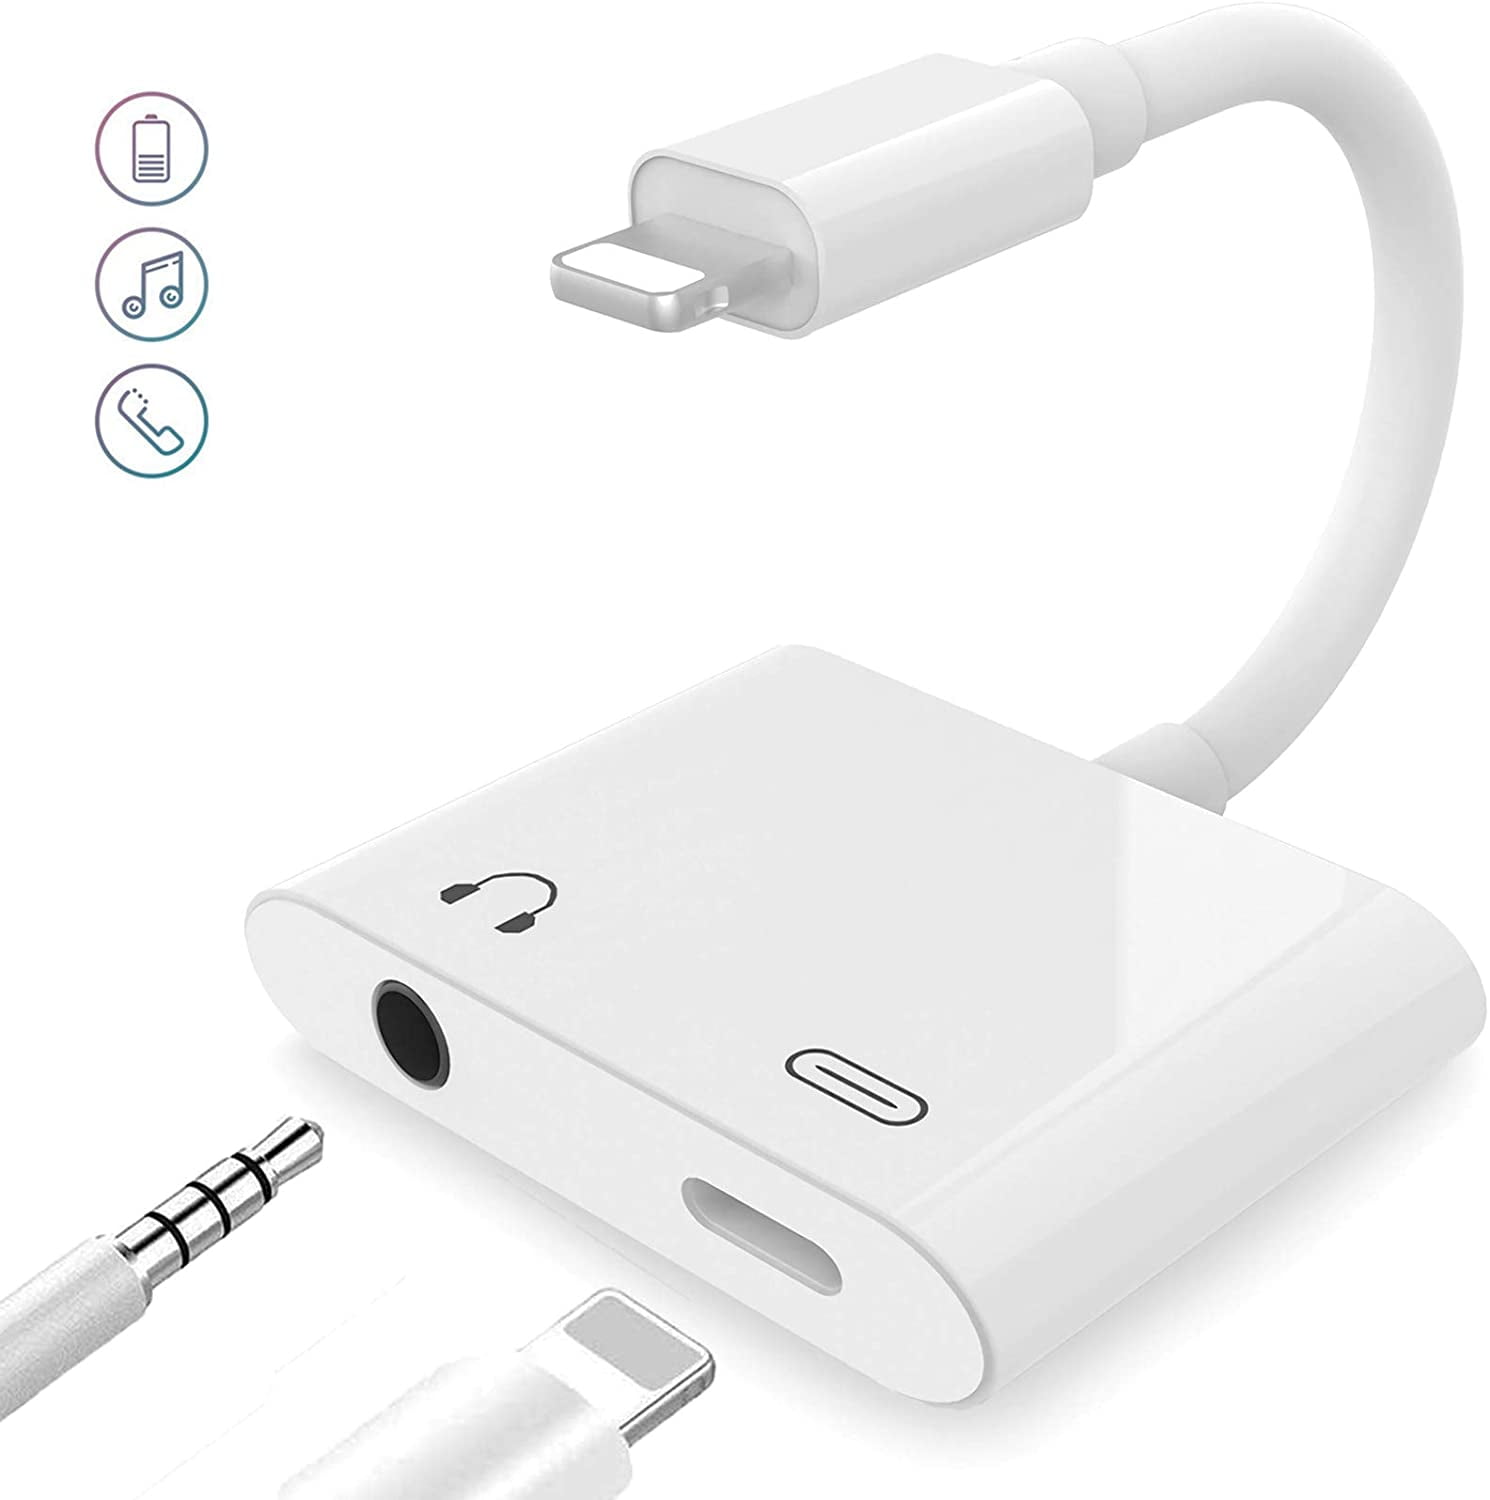 Headphone Jack Aux Adapter Dongle for iPhone Xs/Xs Max/XR/ 8/8 Plus/X 10 / 7/7 Plus Adapter to 3.5mm Jack Converter Car Charge Accessories Cables & Audio Connector 2 in 1 Earphone Splitter Adaptor 